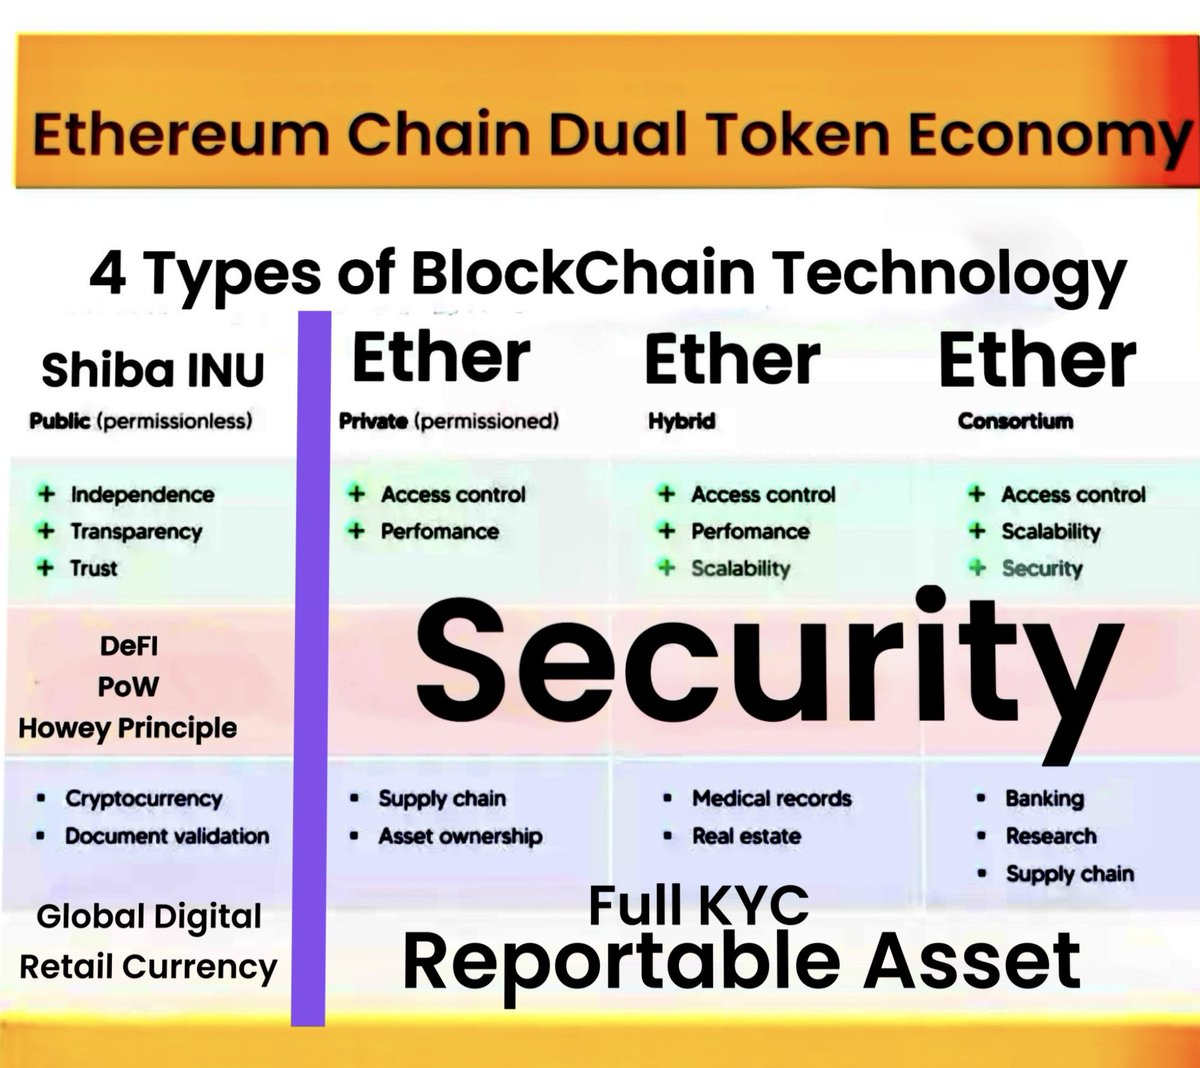 If SEC will call Ether as SECURITY then here is my proposal to Vitalik using #SHIB  for Public EthChain . This is the 4 types of Blockchain Technology and i do believe that this is going to be easier for you to understand where i am coming from . It is because of TECHNOLOGY with